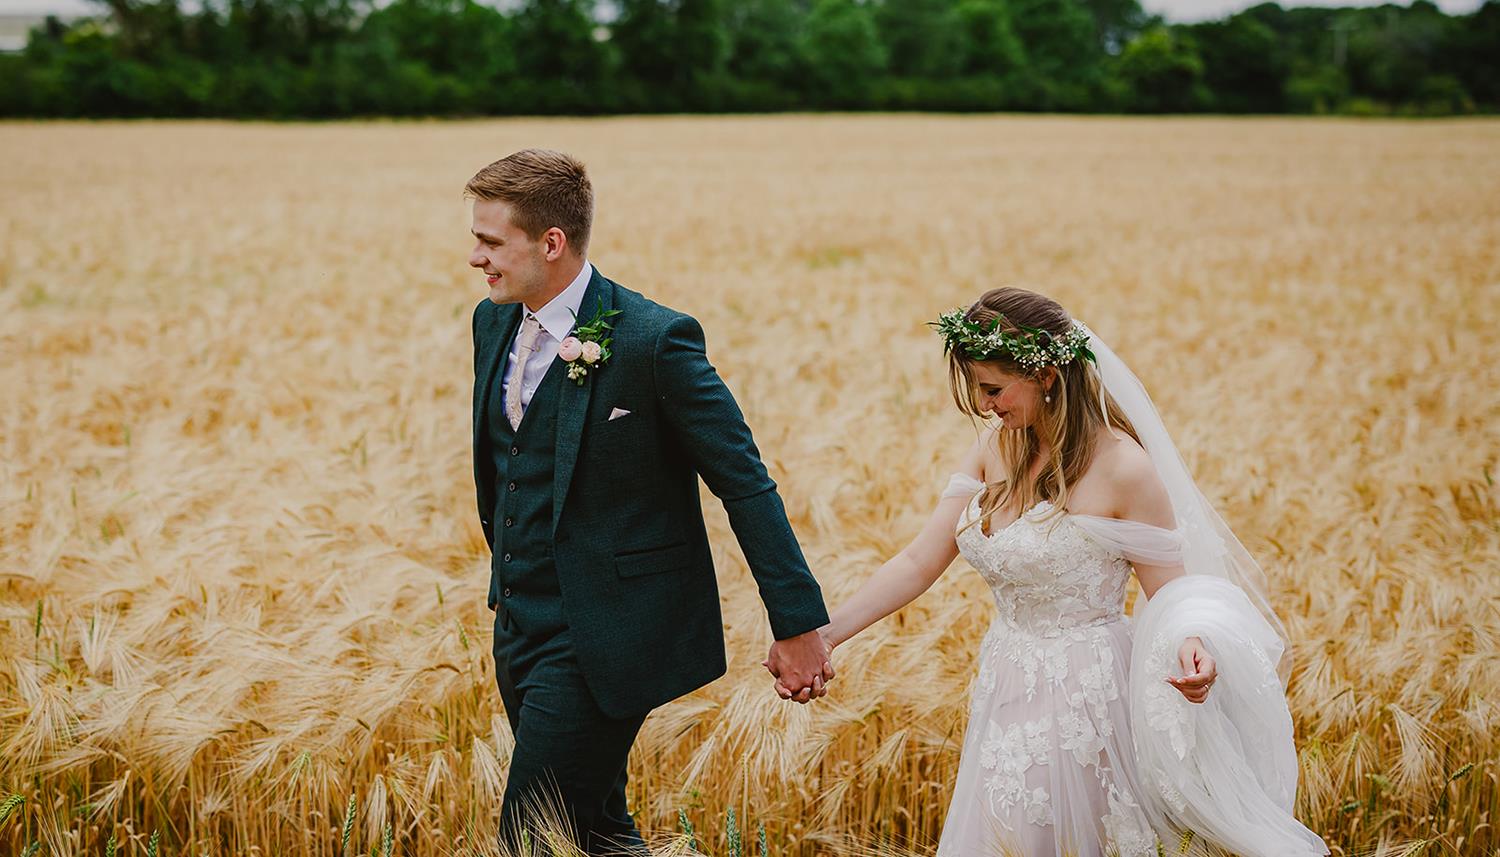 Walking in wheat. Photo Credit: Philip Quinnell Photography